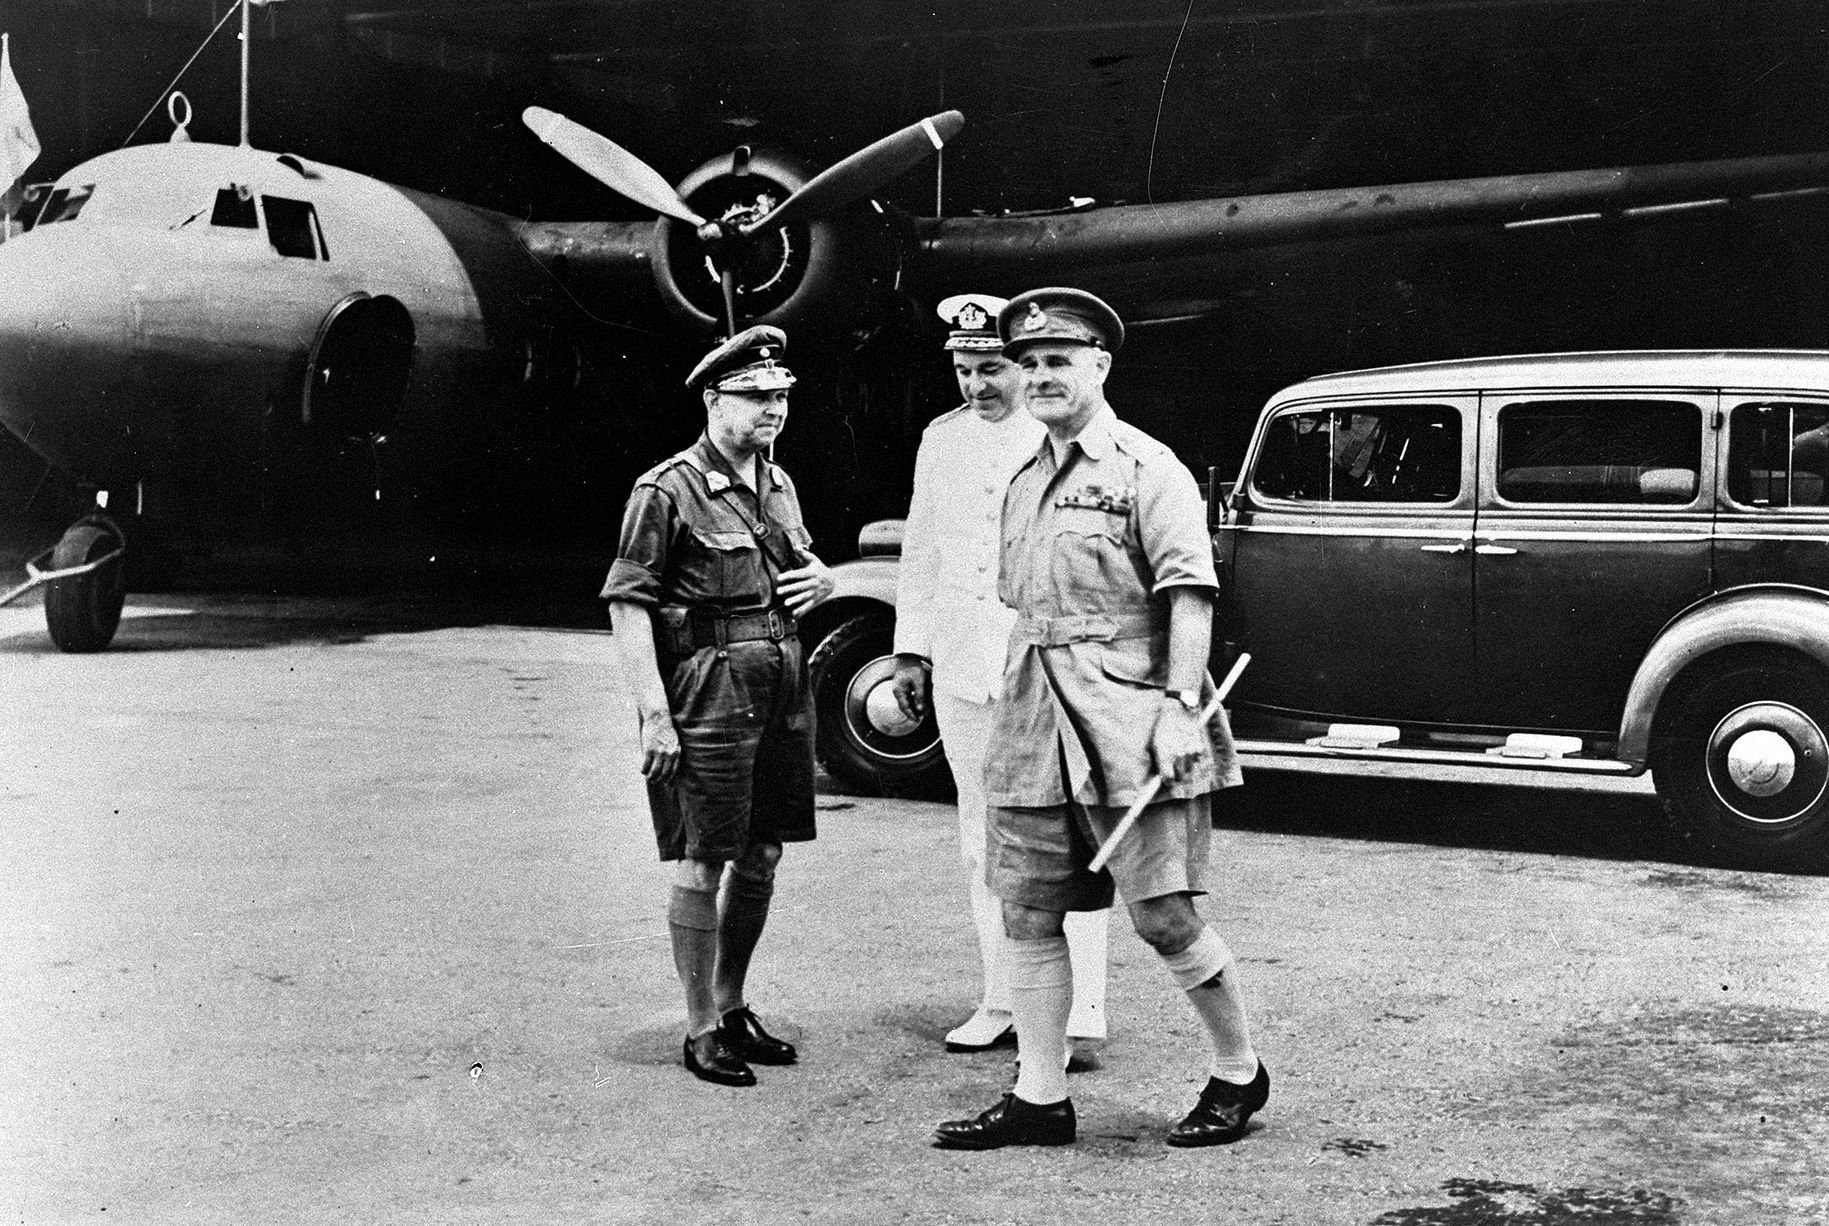 Field Marshal Archibald Wavell arrives in Dutch Indonesia to take command of the short-lived ABDA military partnership. At the time, Wavell had fallen out of favor with Prime Minister Winston Churchill.